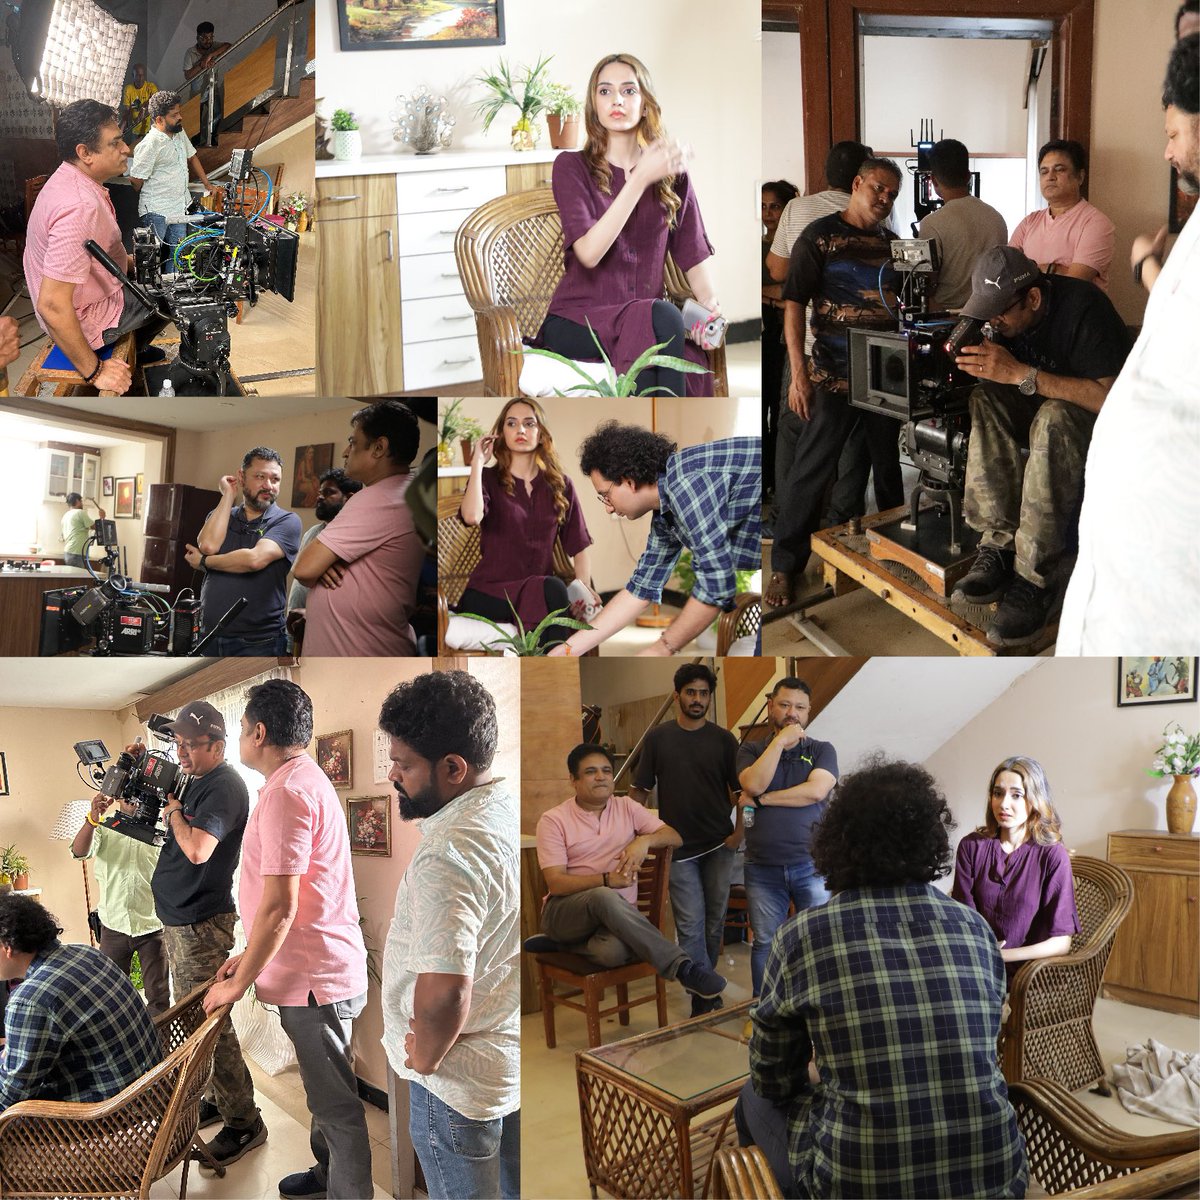 Behind-the-scene glimpse of first of the three films (“Toh Rishta Pakka Samjhein?”) created and produced by BeanstalkAsia for tile solution experts, Homesure TileEX from Walplast Products Pvt. Ltd. - with Director Shashii Bhushan
#BeanstalkAsiaIMC #BeanstalkAsiaProductions